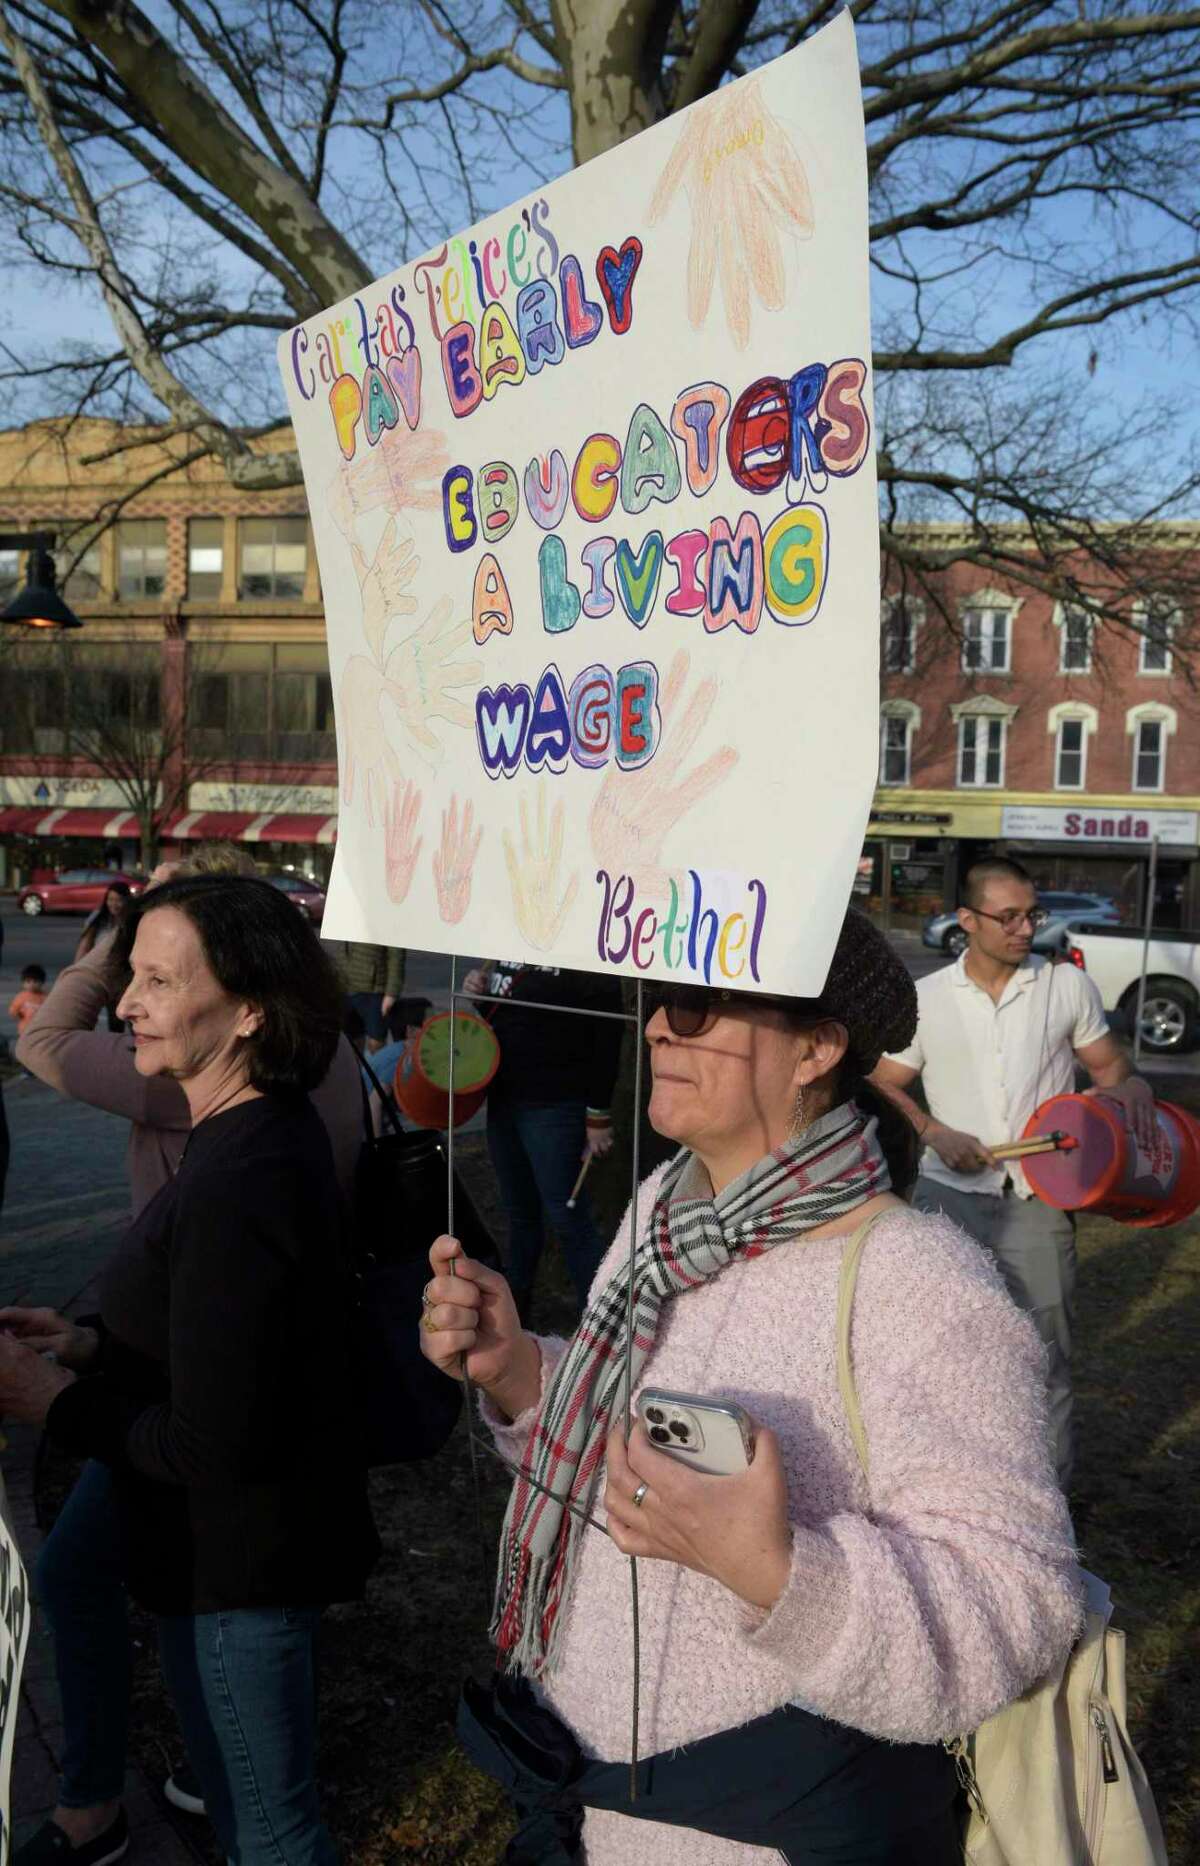 Brigida Mendieta, a child care provider, attended a rally in front of the Public Library by child care workers on March 15, 2022. The groups gathered were calling for better reimbursement for state-funded child care costs, as well as a raise in minimum wage pay.